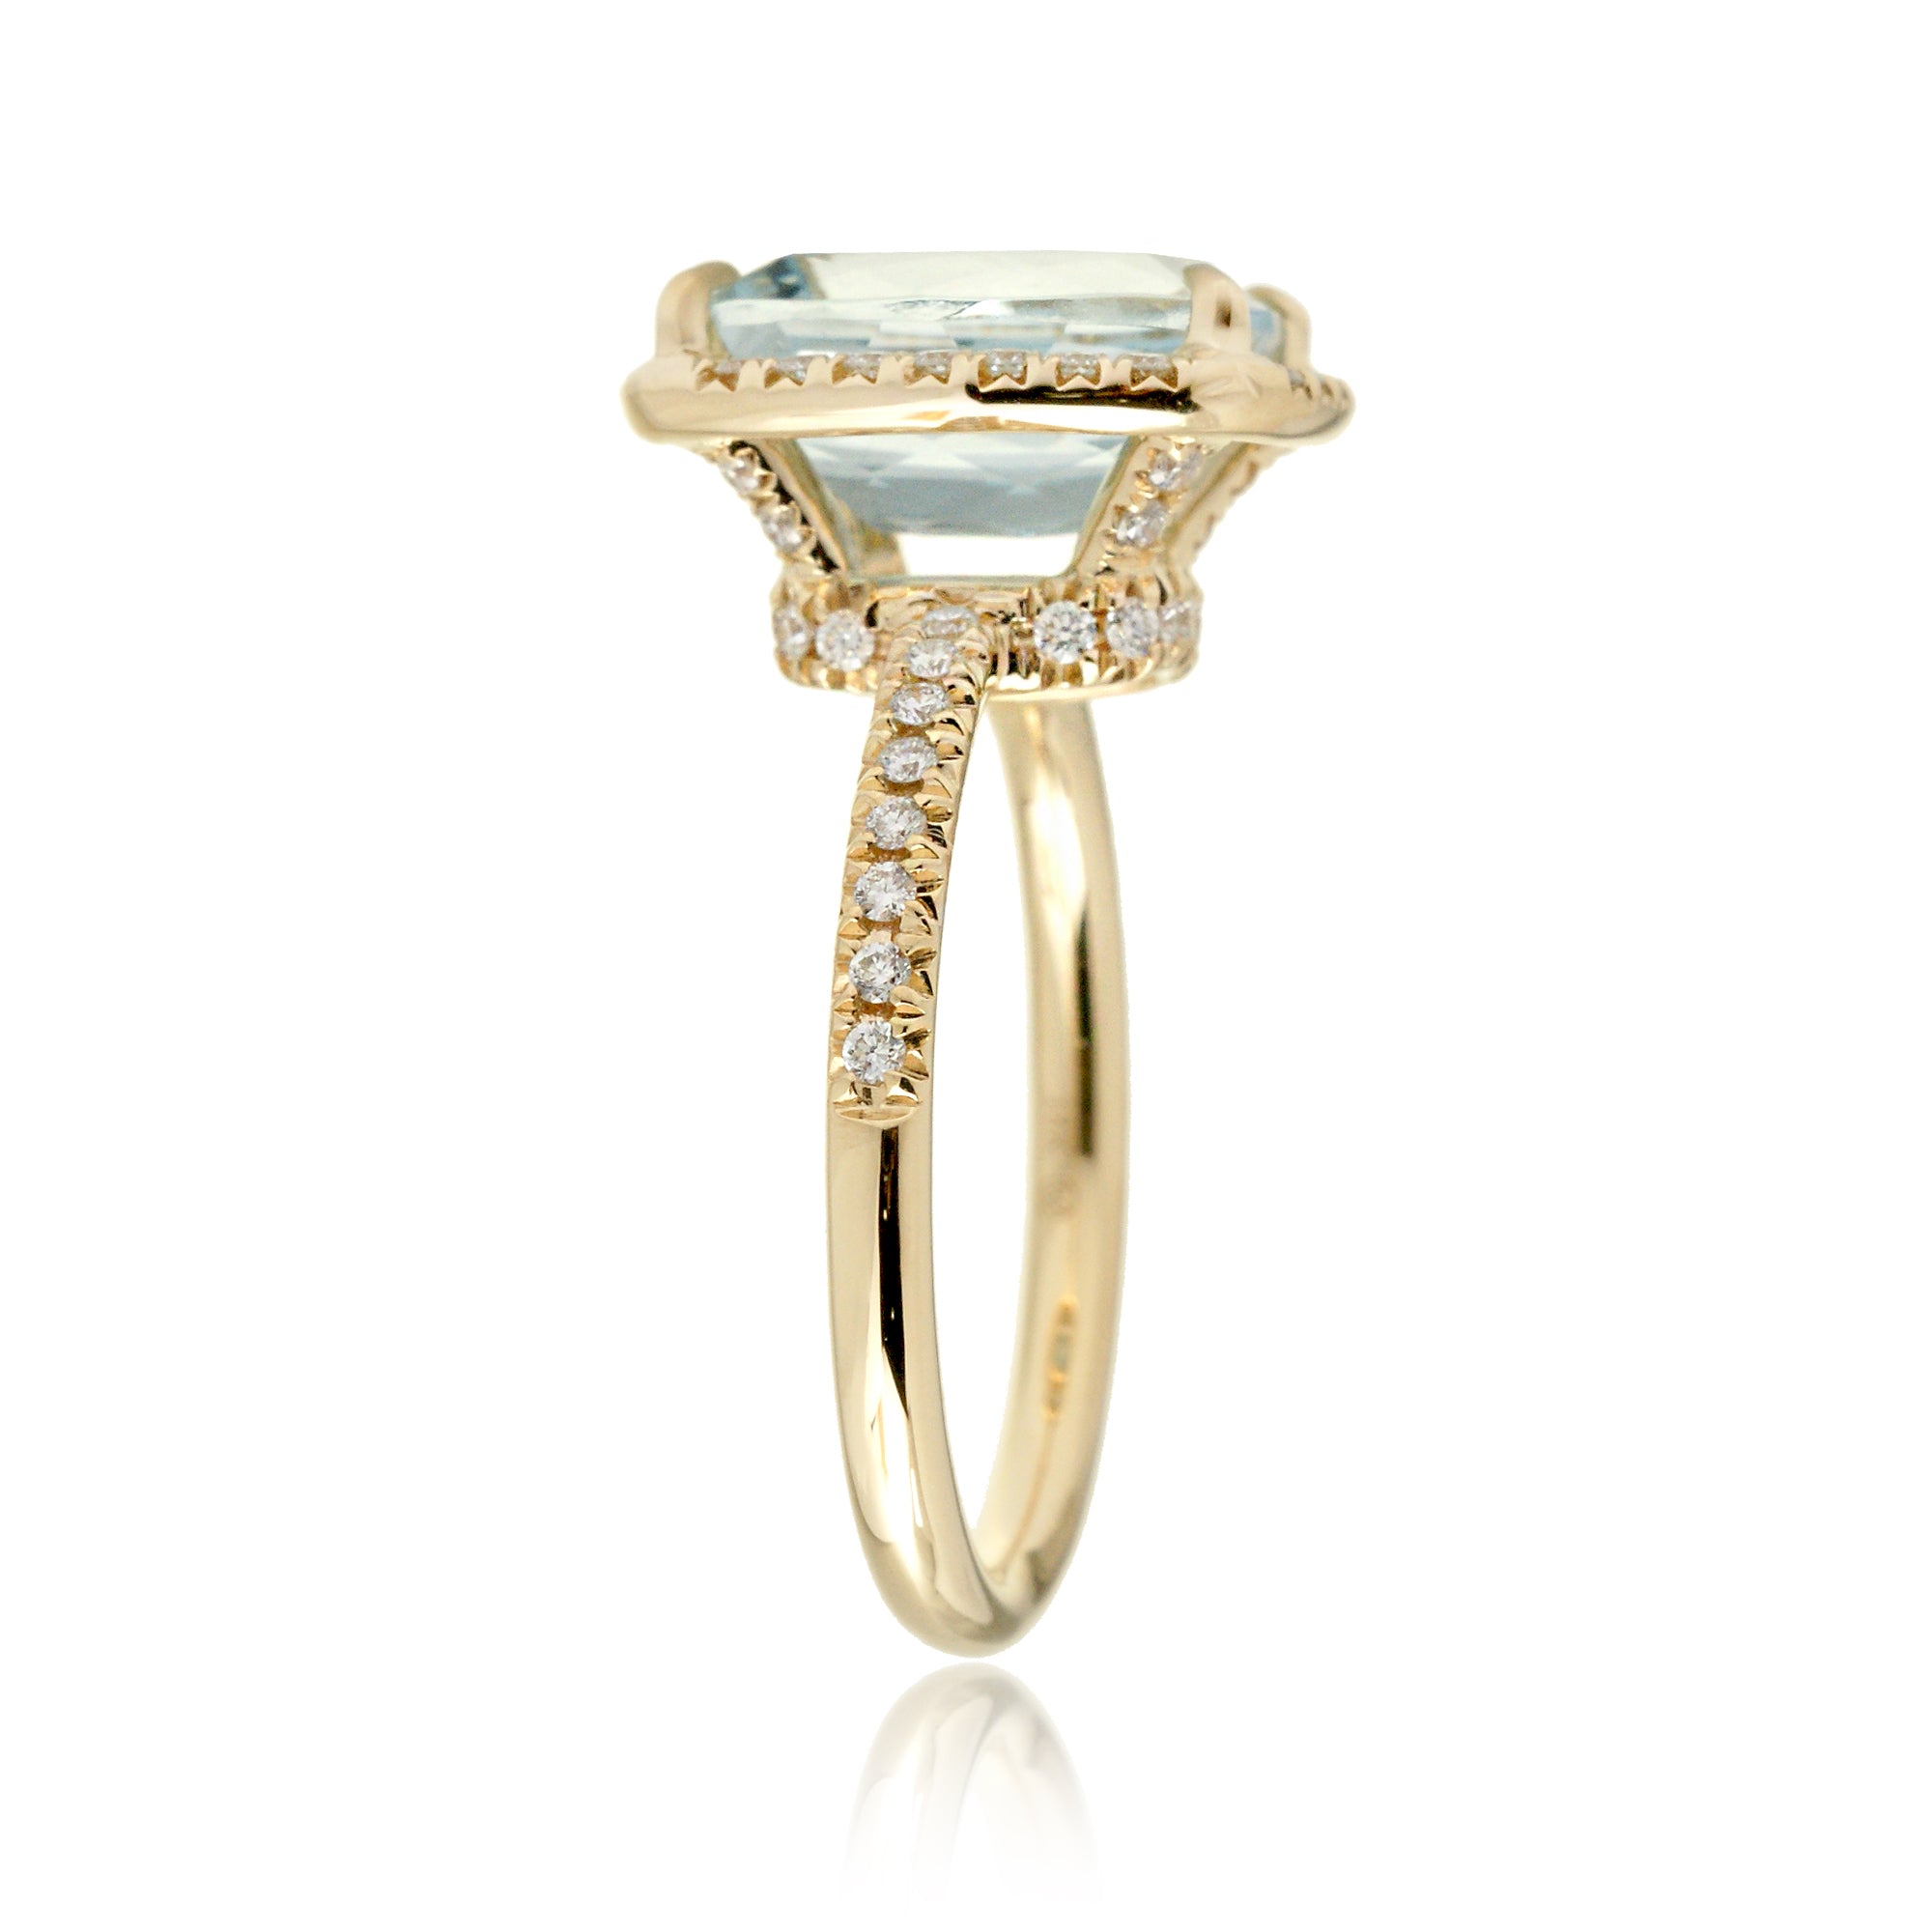 The Drenched Cushion Aquamarine Ring